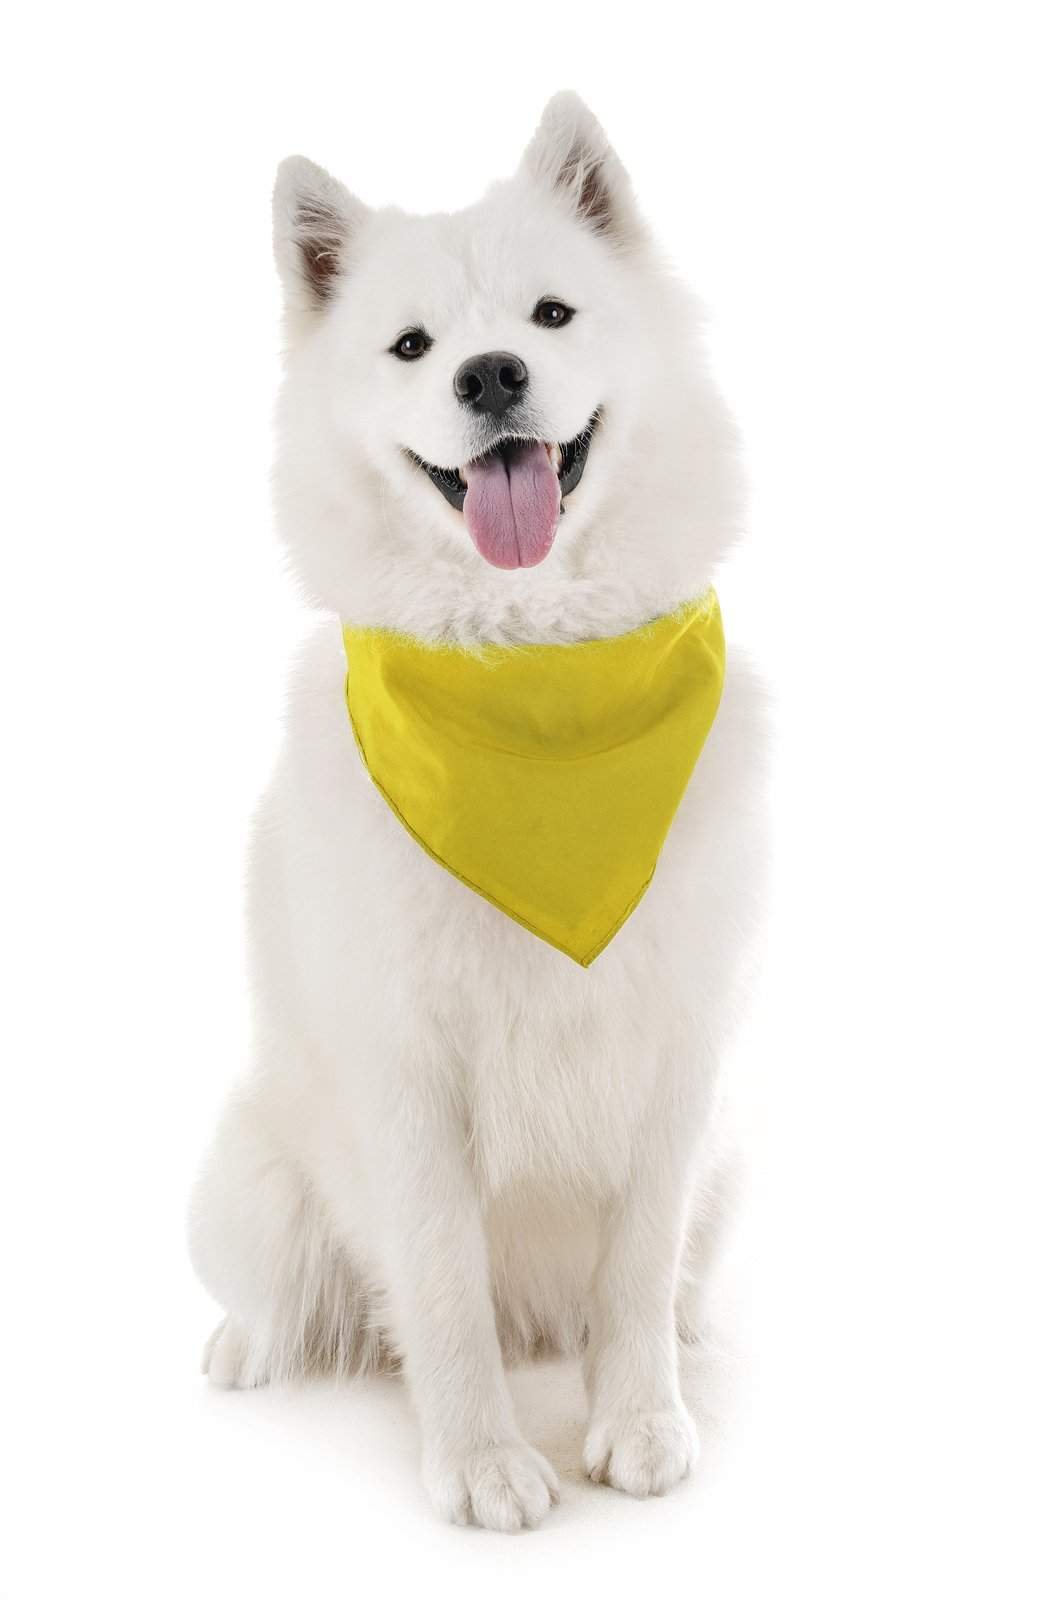 Dog Bandanas - 6 Pack - Scarf Triangle Bibs for Small, Medium and Large Puppies, Dogs and Cats